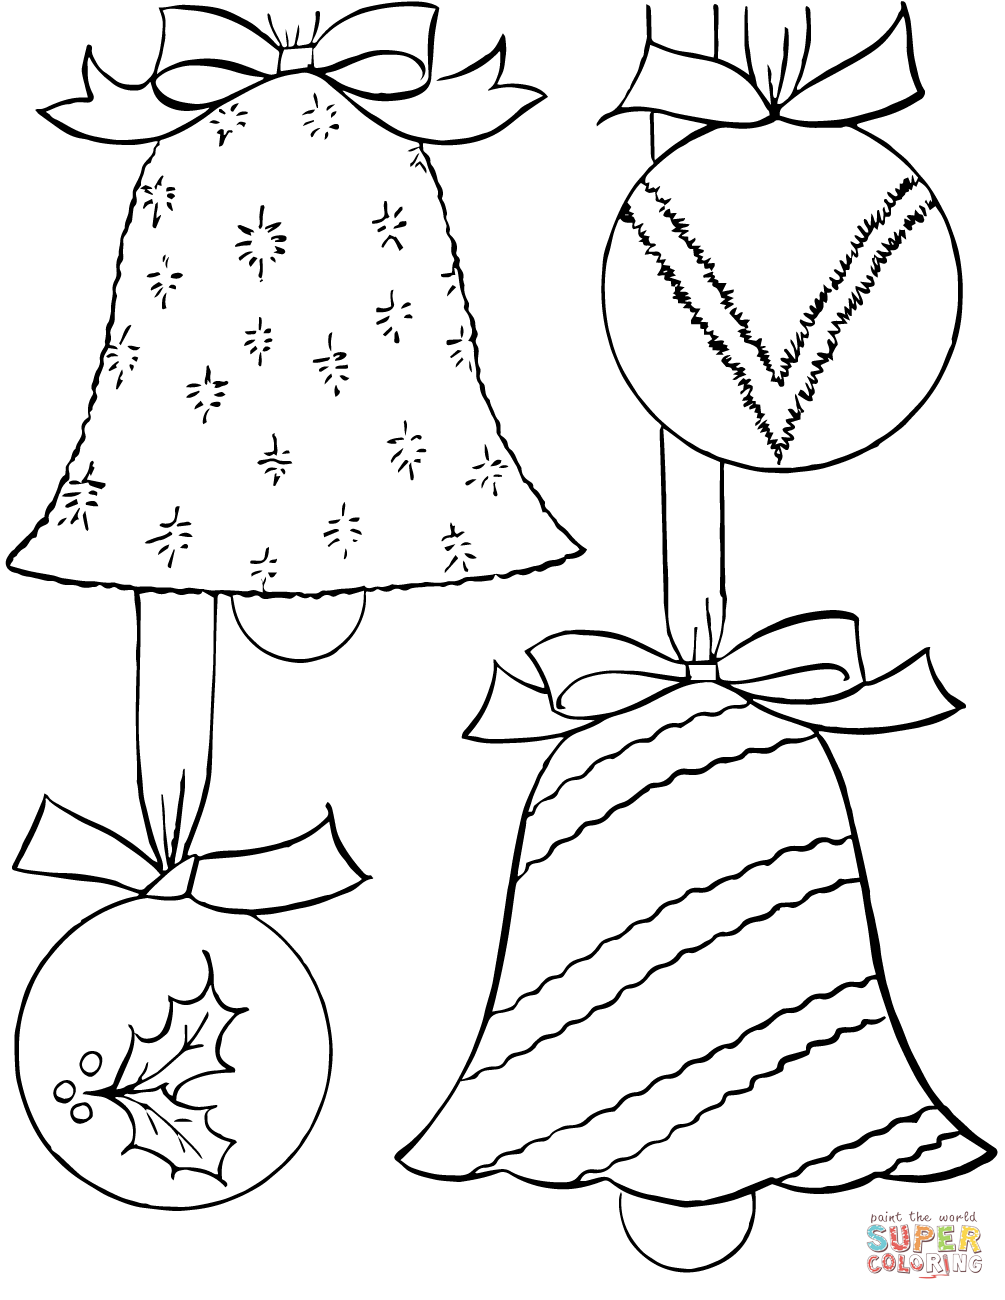 the Christmas Ornaments coloring pages